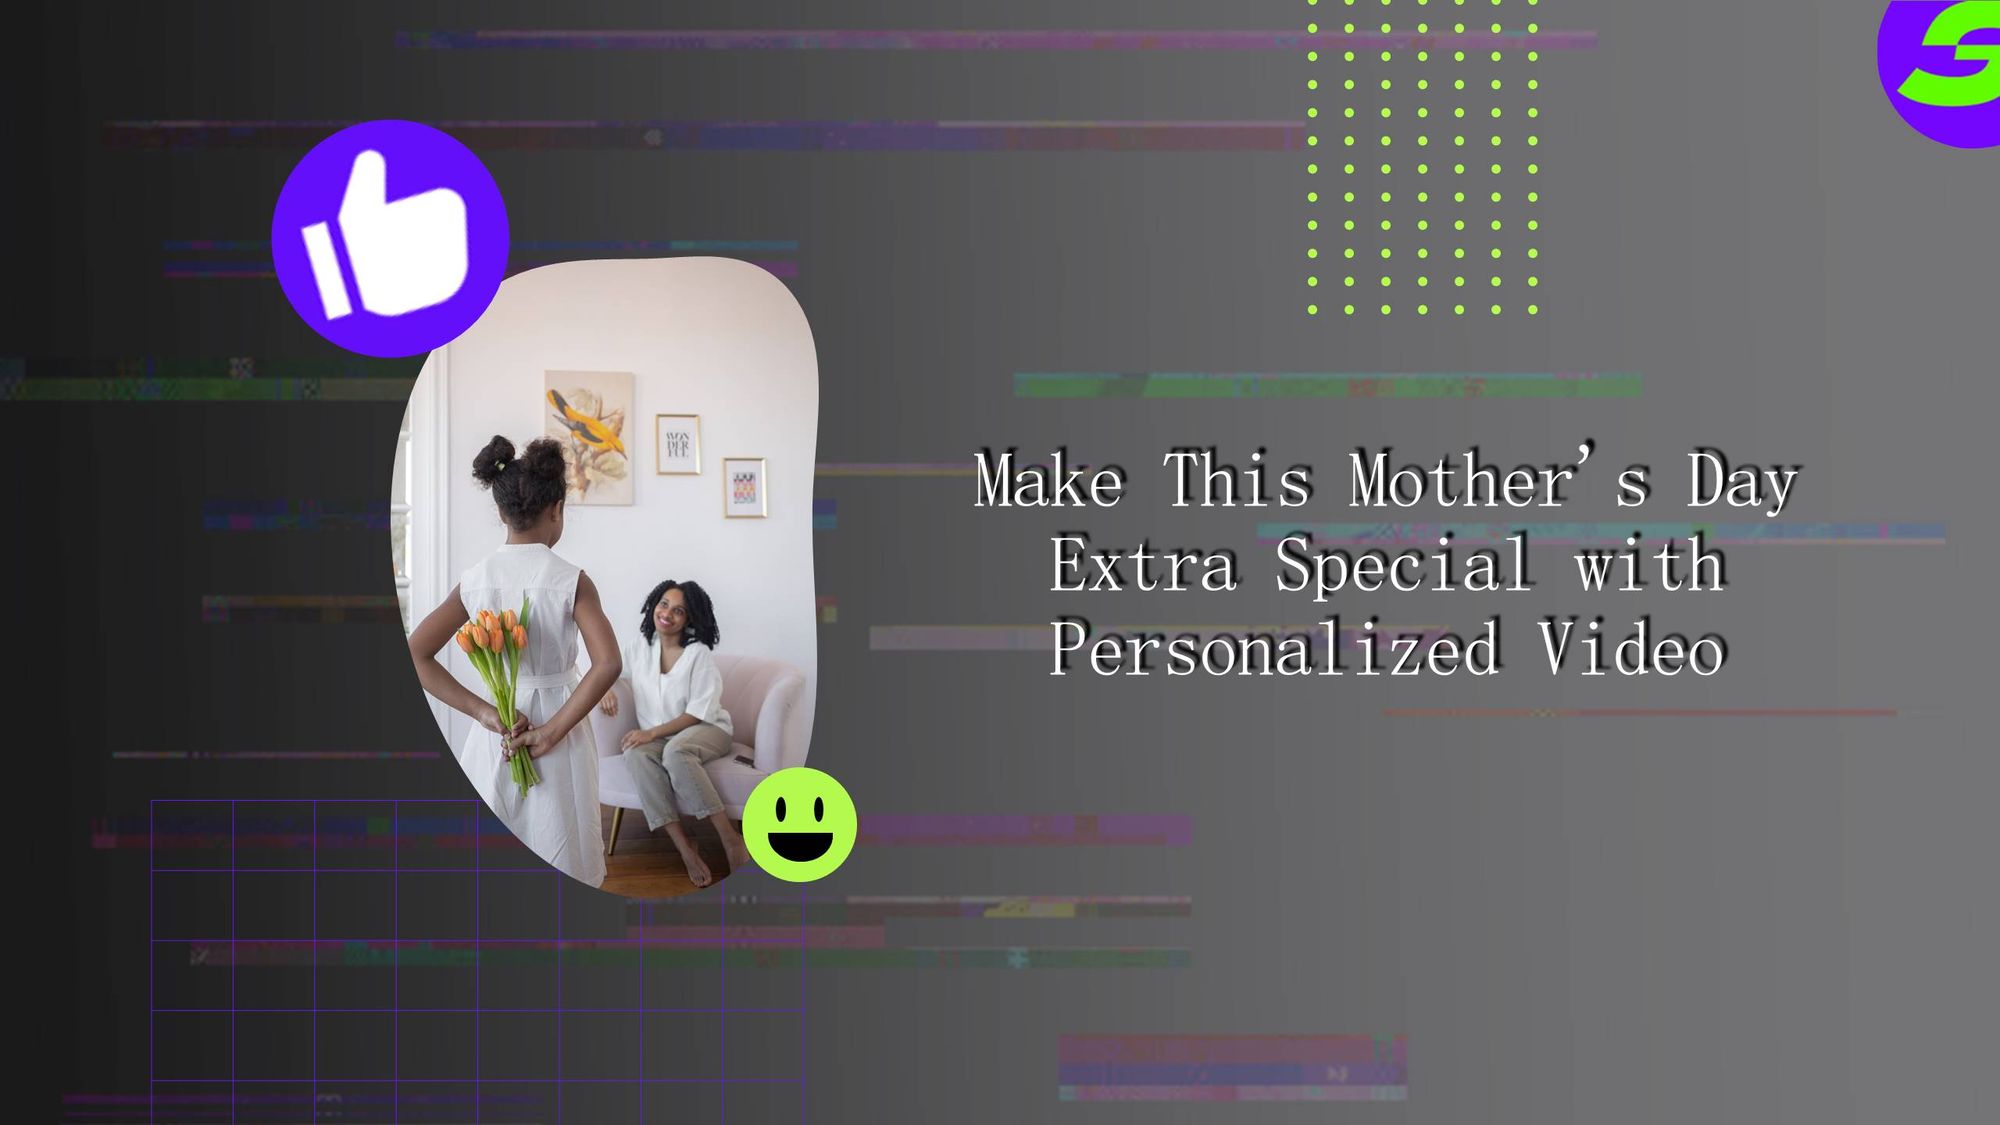 Create a Personalized Mother's Day Video with ShotCut free video editor.